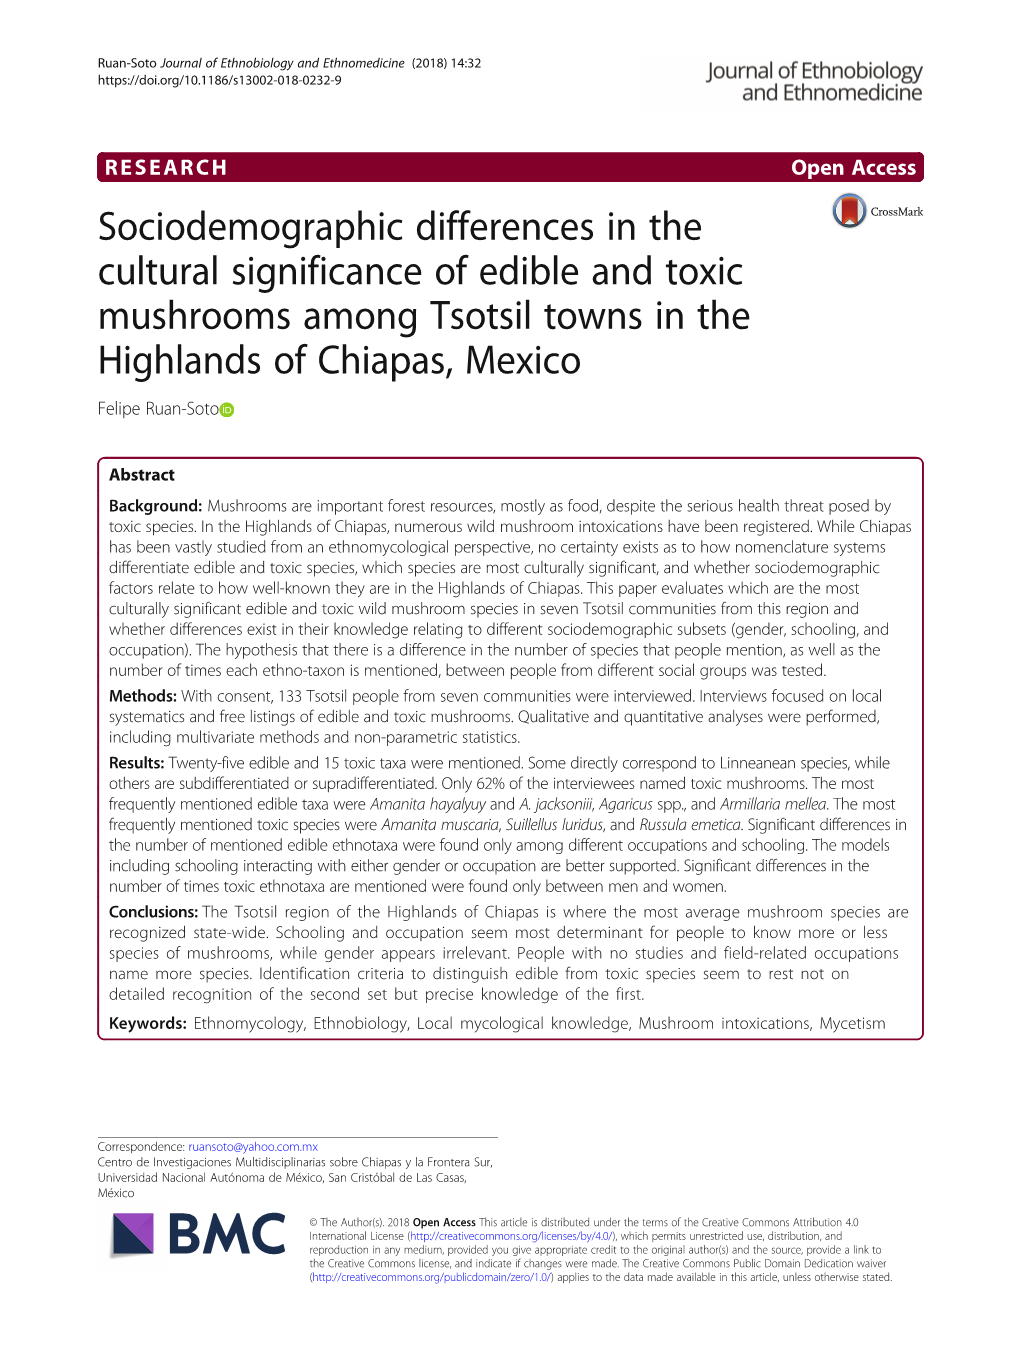 Sociodemographic Differences in the Cultural Significance of Edible and Toxic Mushrooms Among Tsotsil Towns in the Highlands of Chiapas, Mexico Felipe Ruan-Soto